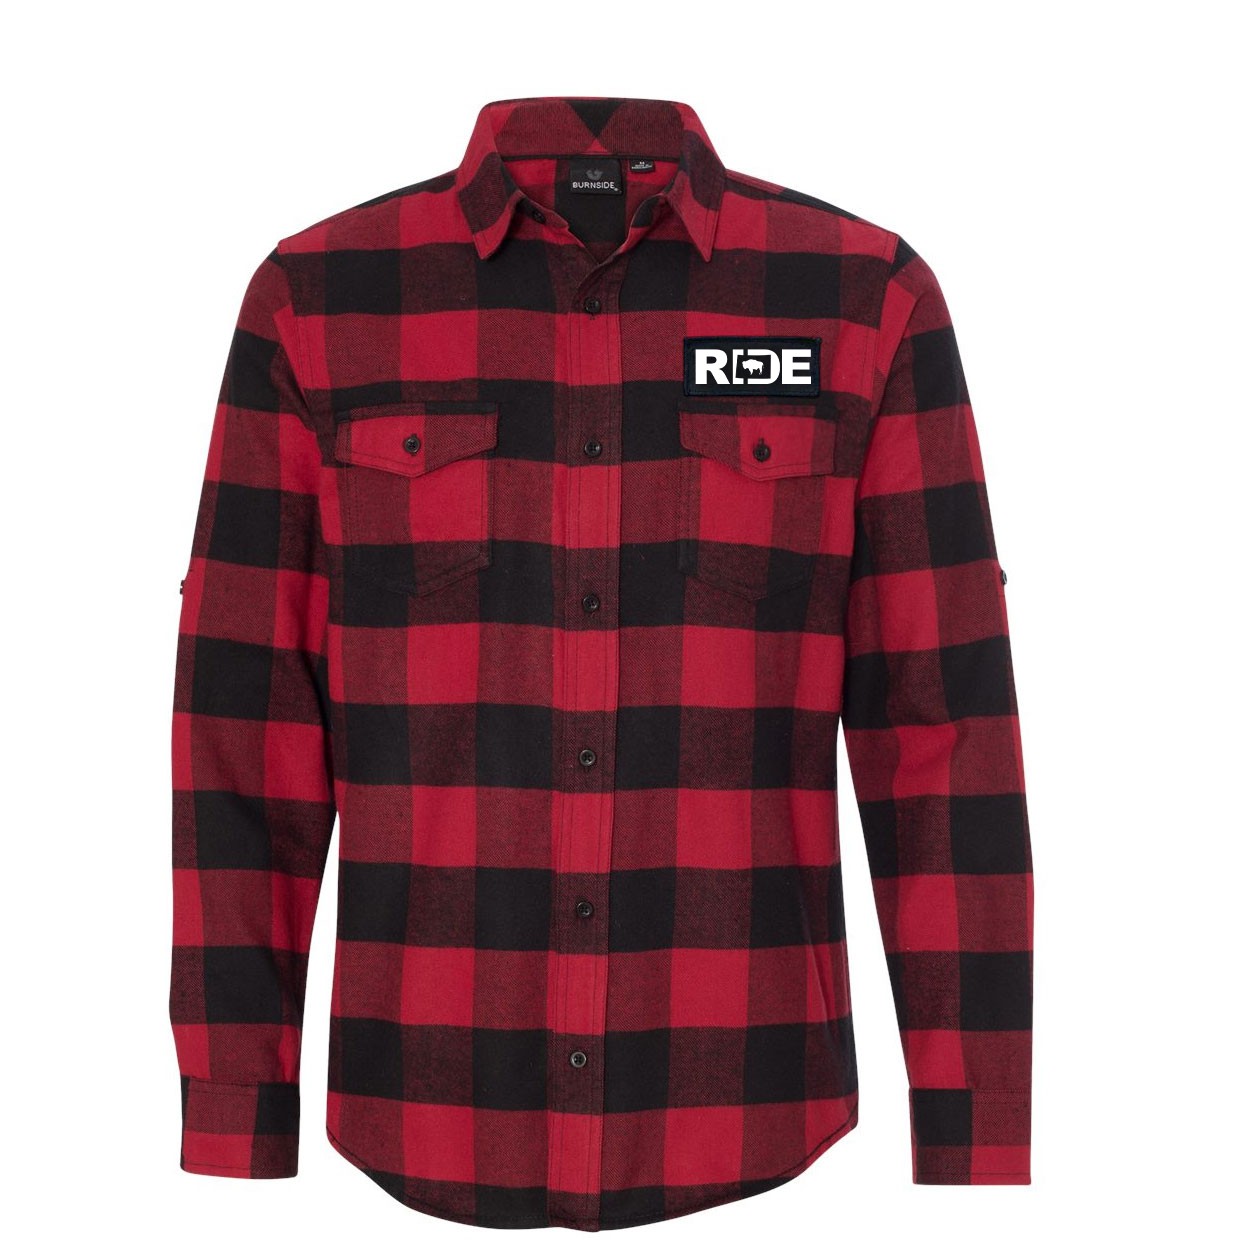 Ride Wyoming Classic Unisex Long Sleeve Woven Patch Flannel Shirt Red/Black Buffalo (White Logo)